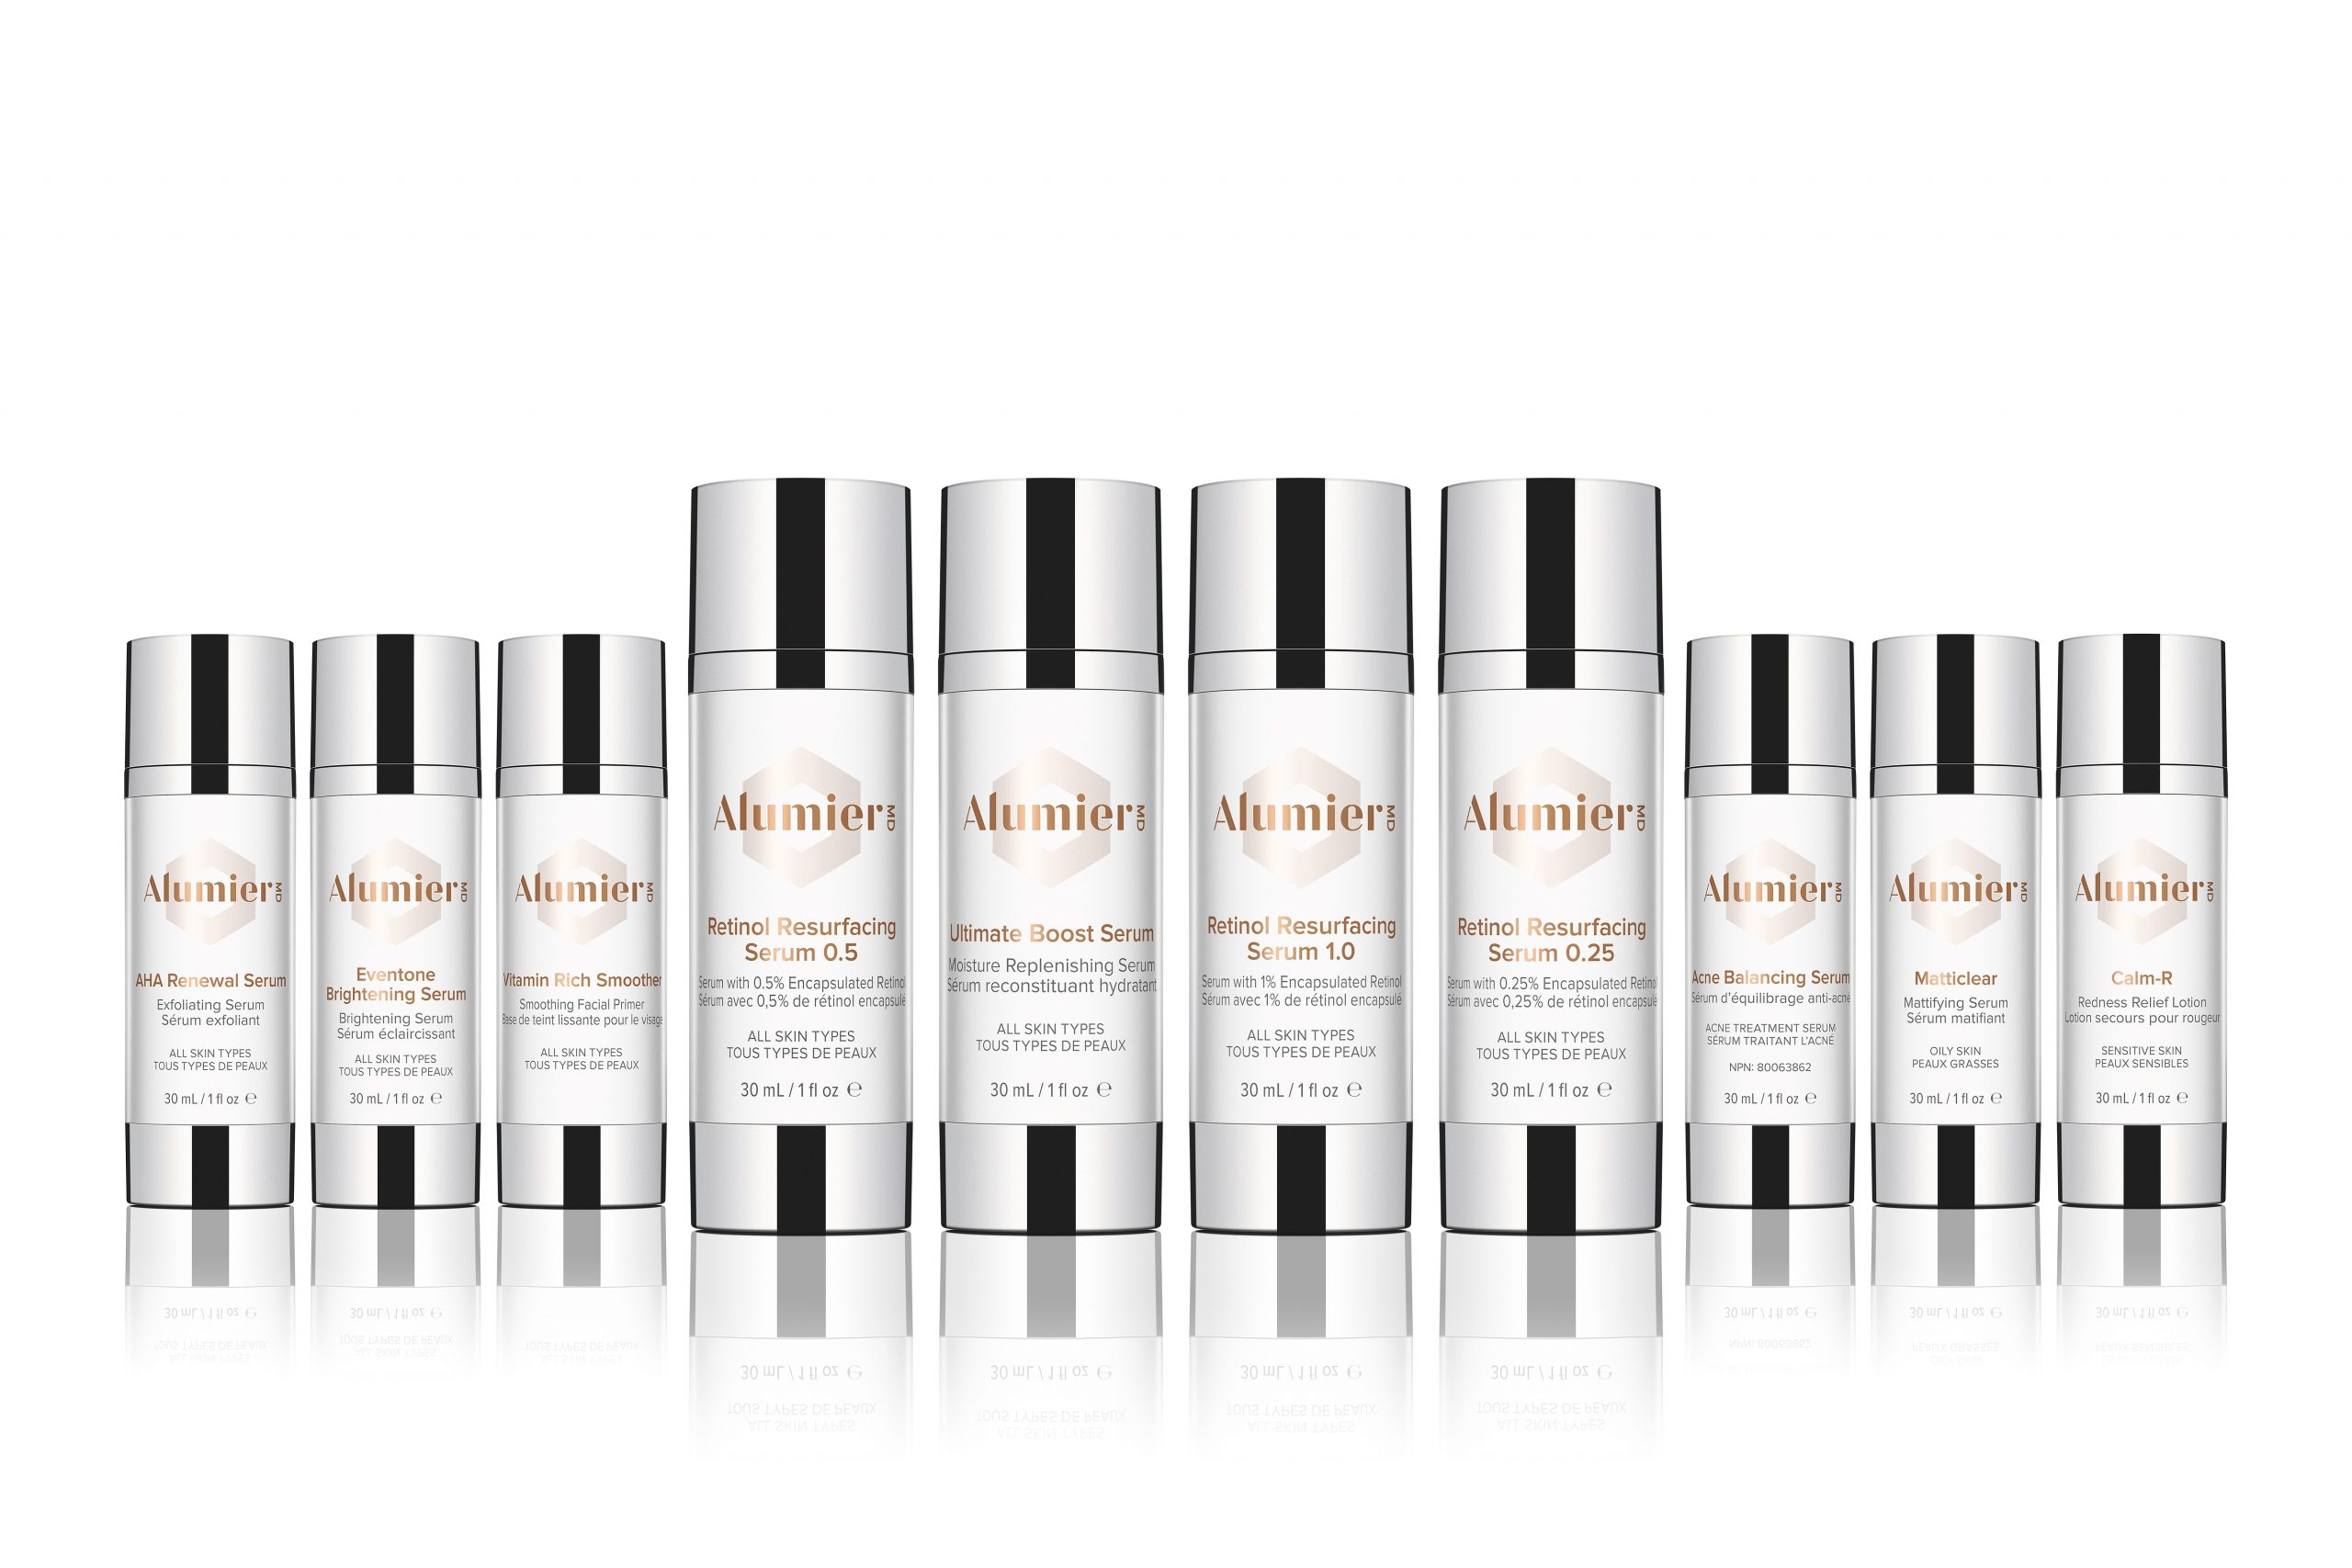 AlumierMD Ultimate Boost Serum ingredients (Explained)